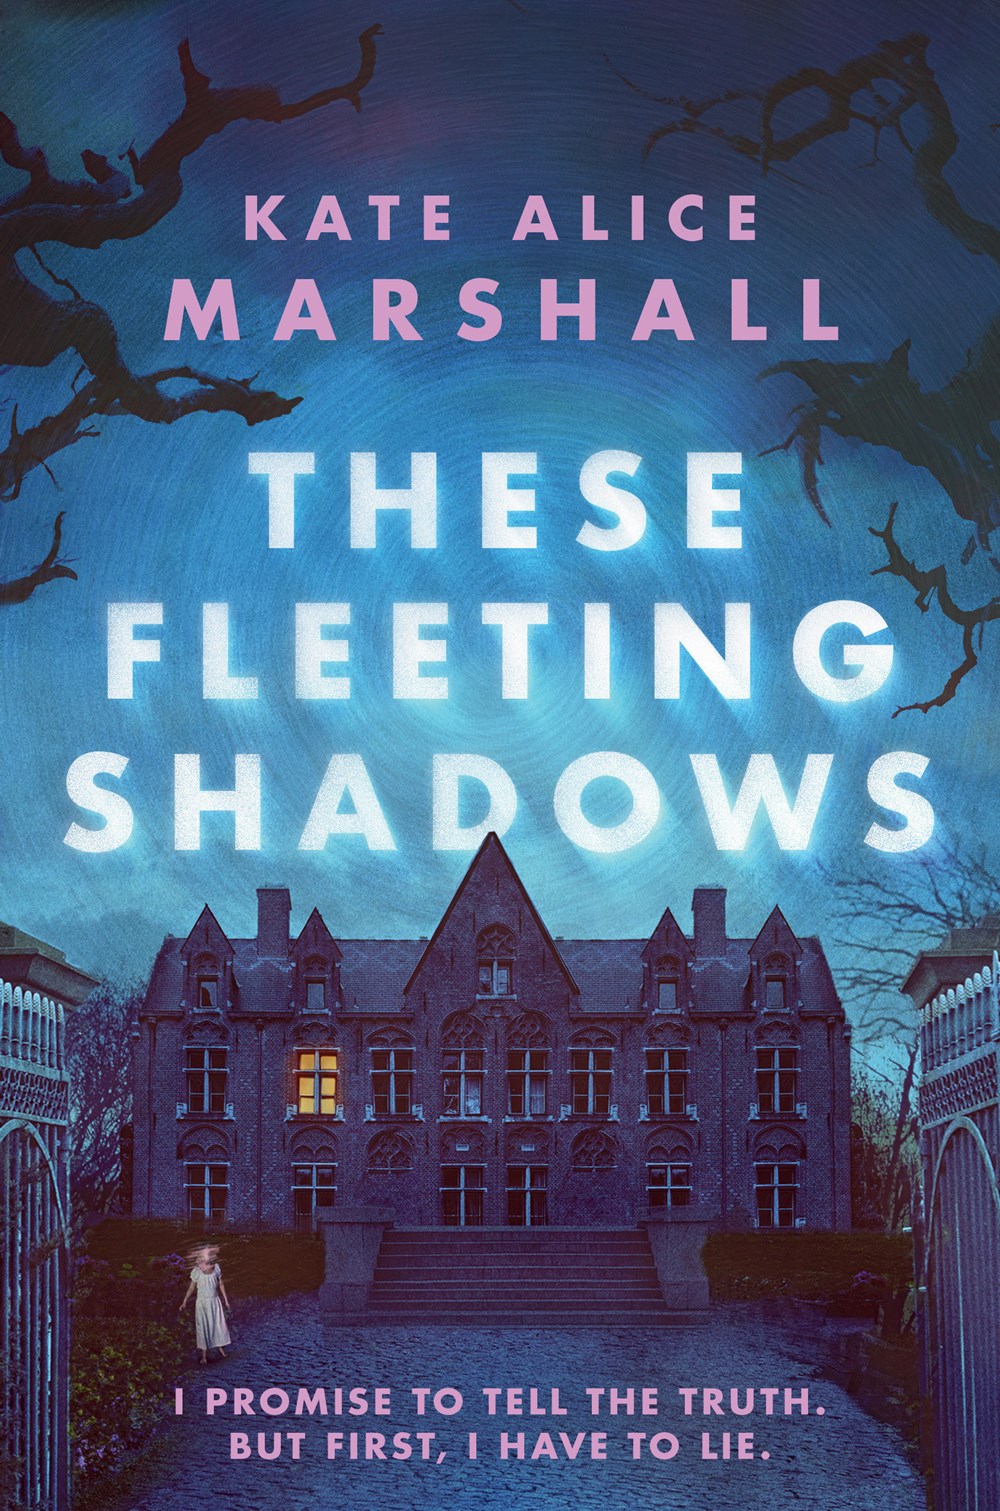 These Fleeting Shadows by Kate Alice Marshall